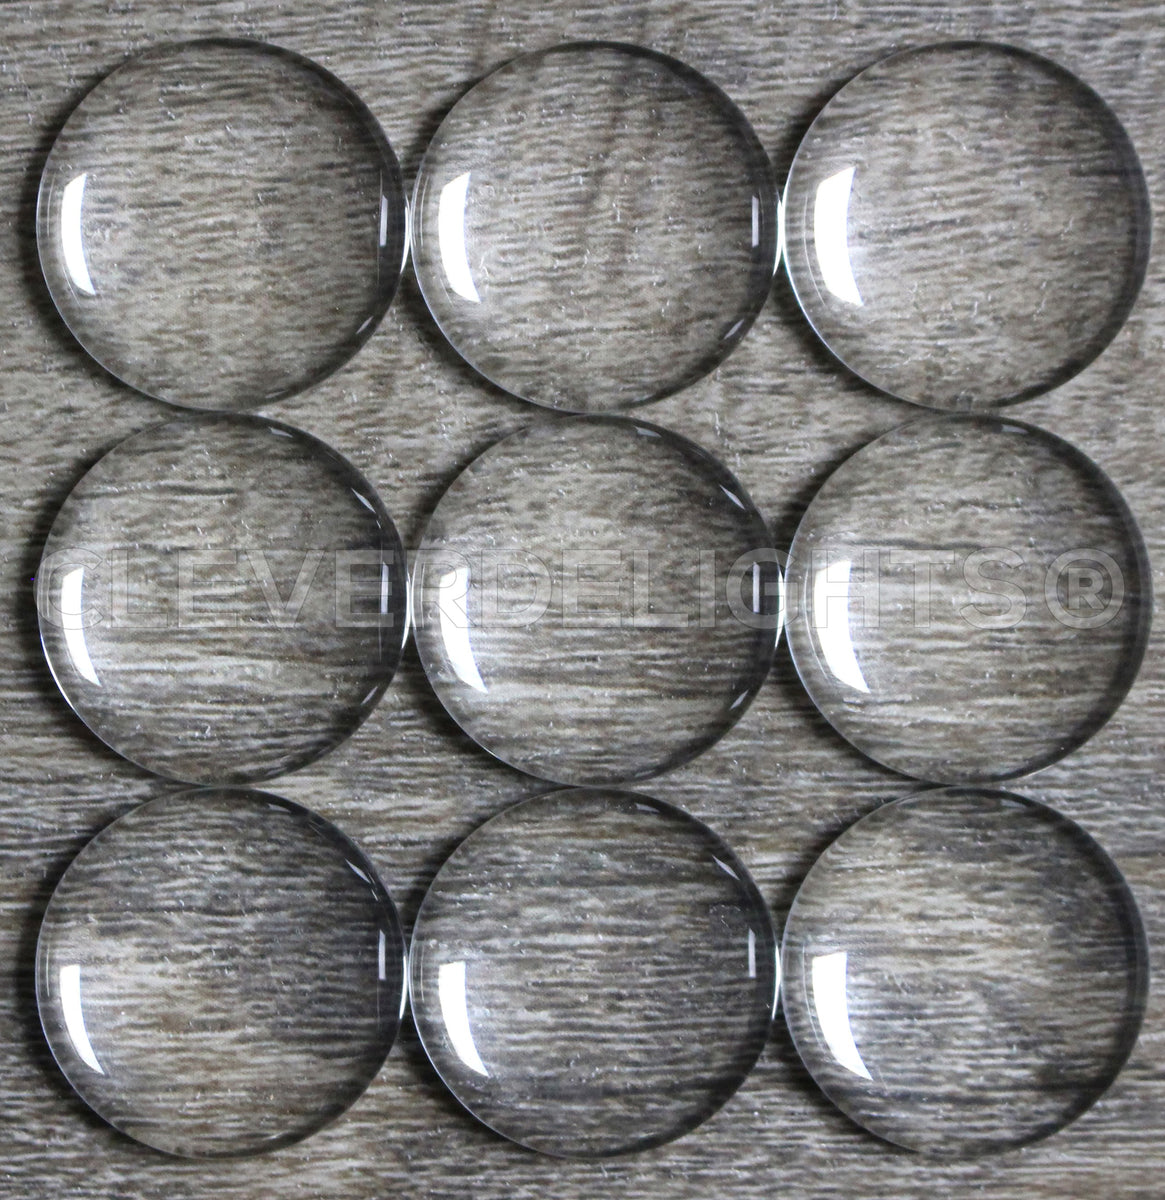 CleverDelights 30mm (1 3/16) Round Glass Cabochons